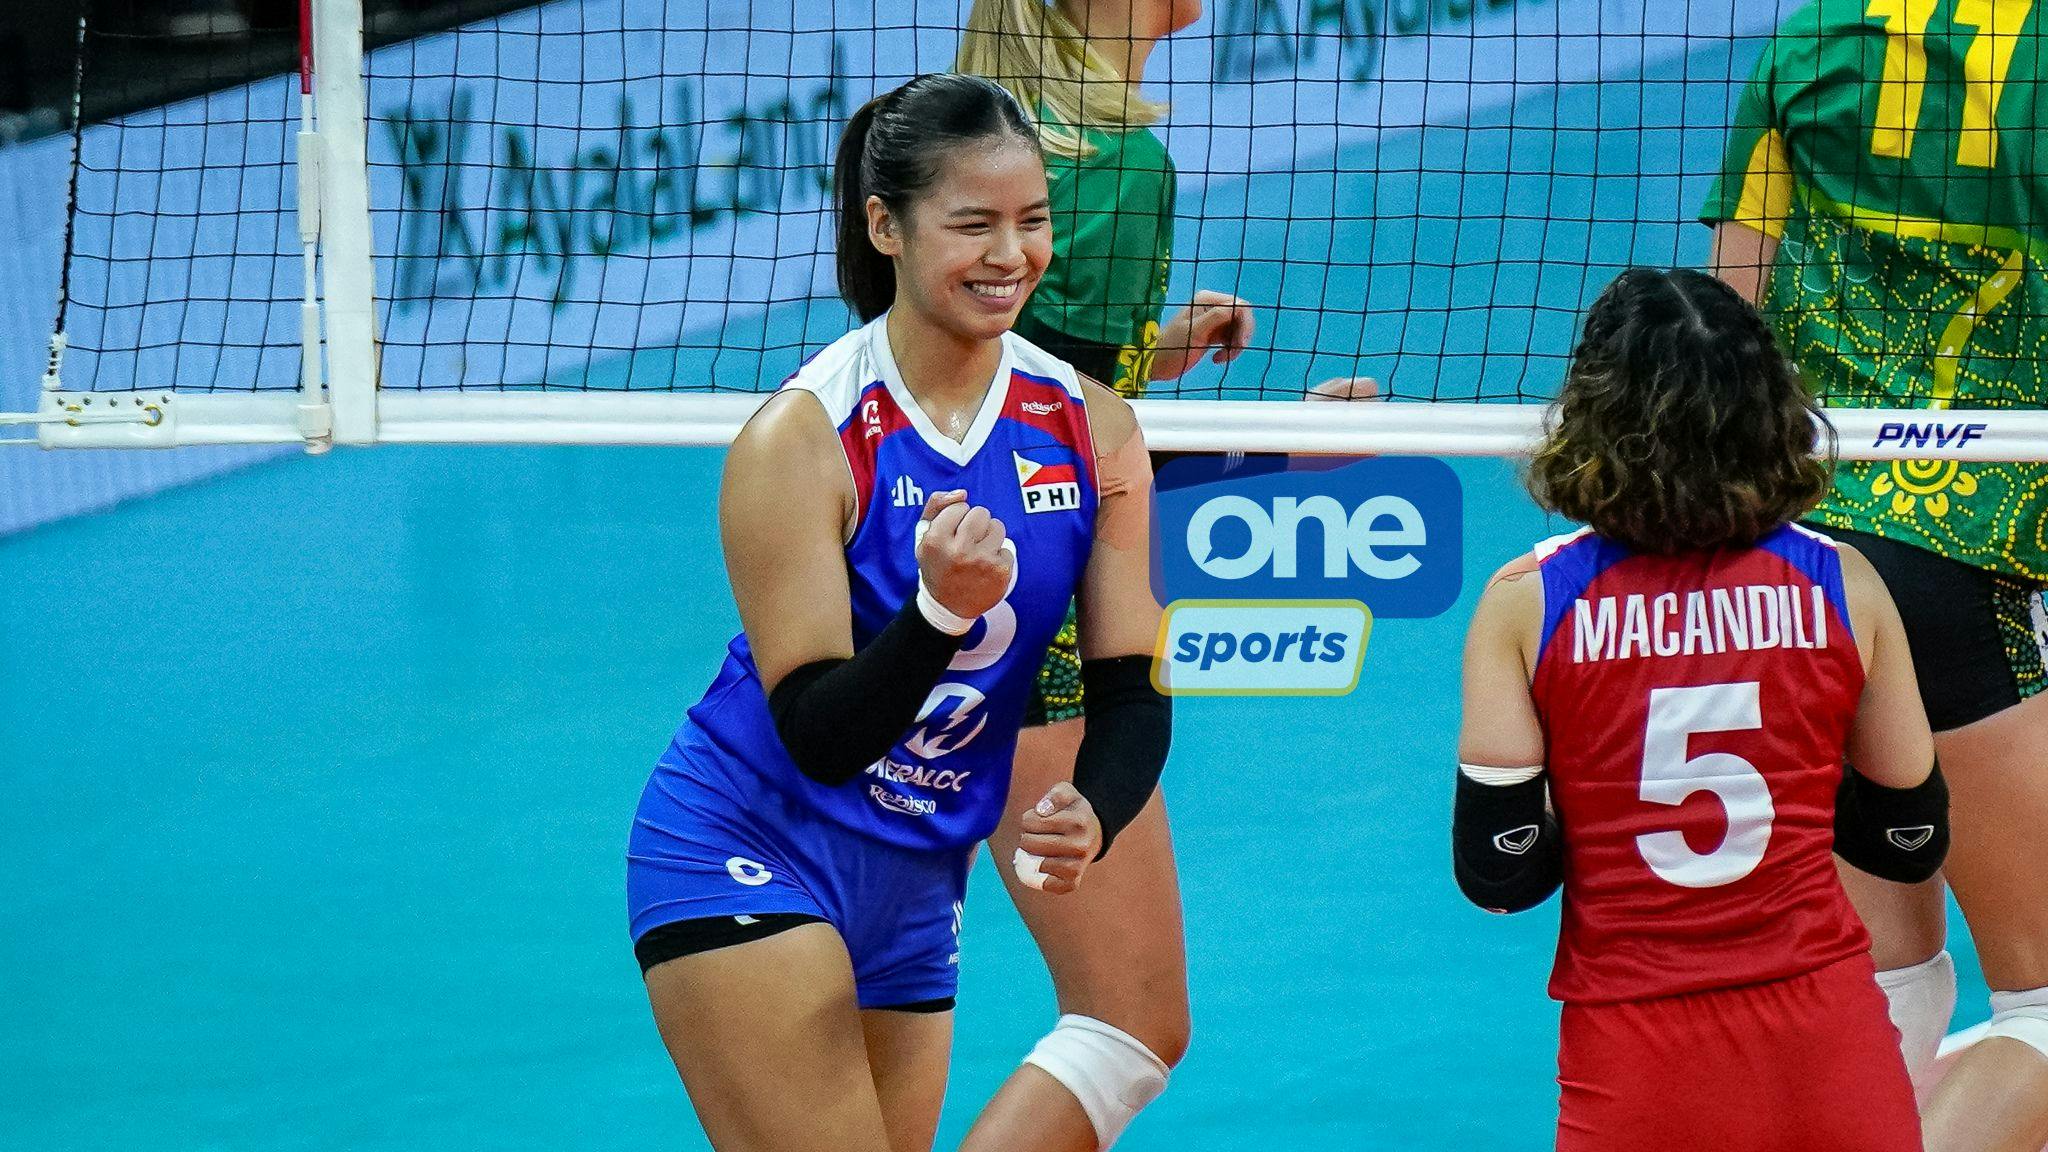 AVC: Eya Laure bares emotions after semis loss, shows resilience for Alas Pilipinas in bronze match